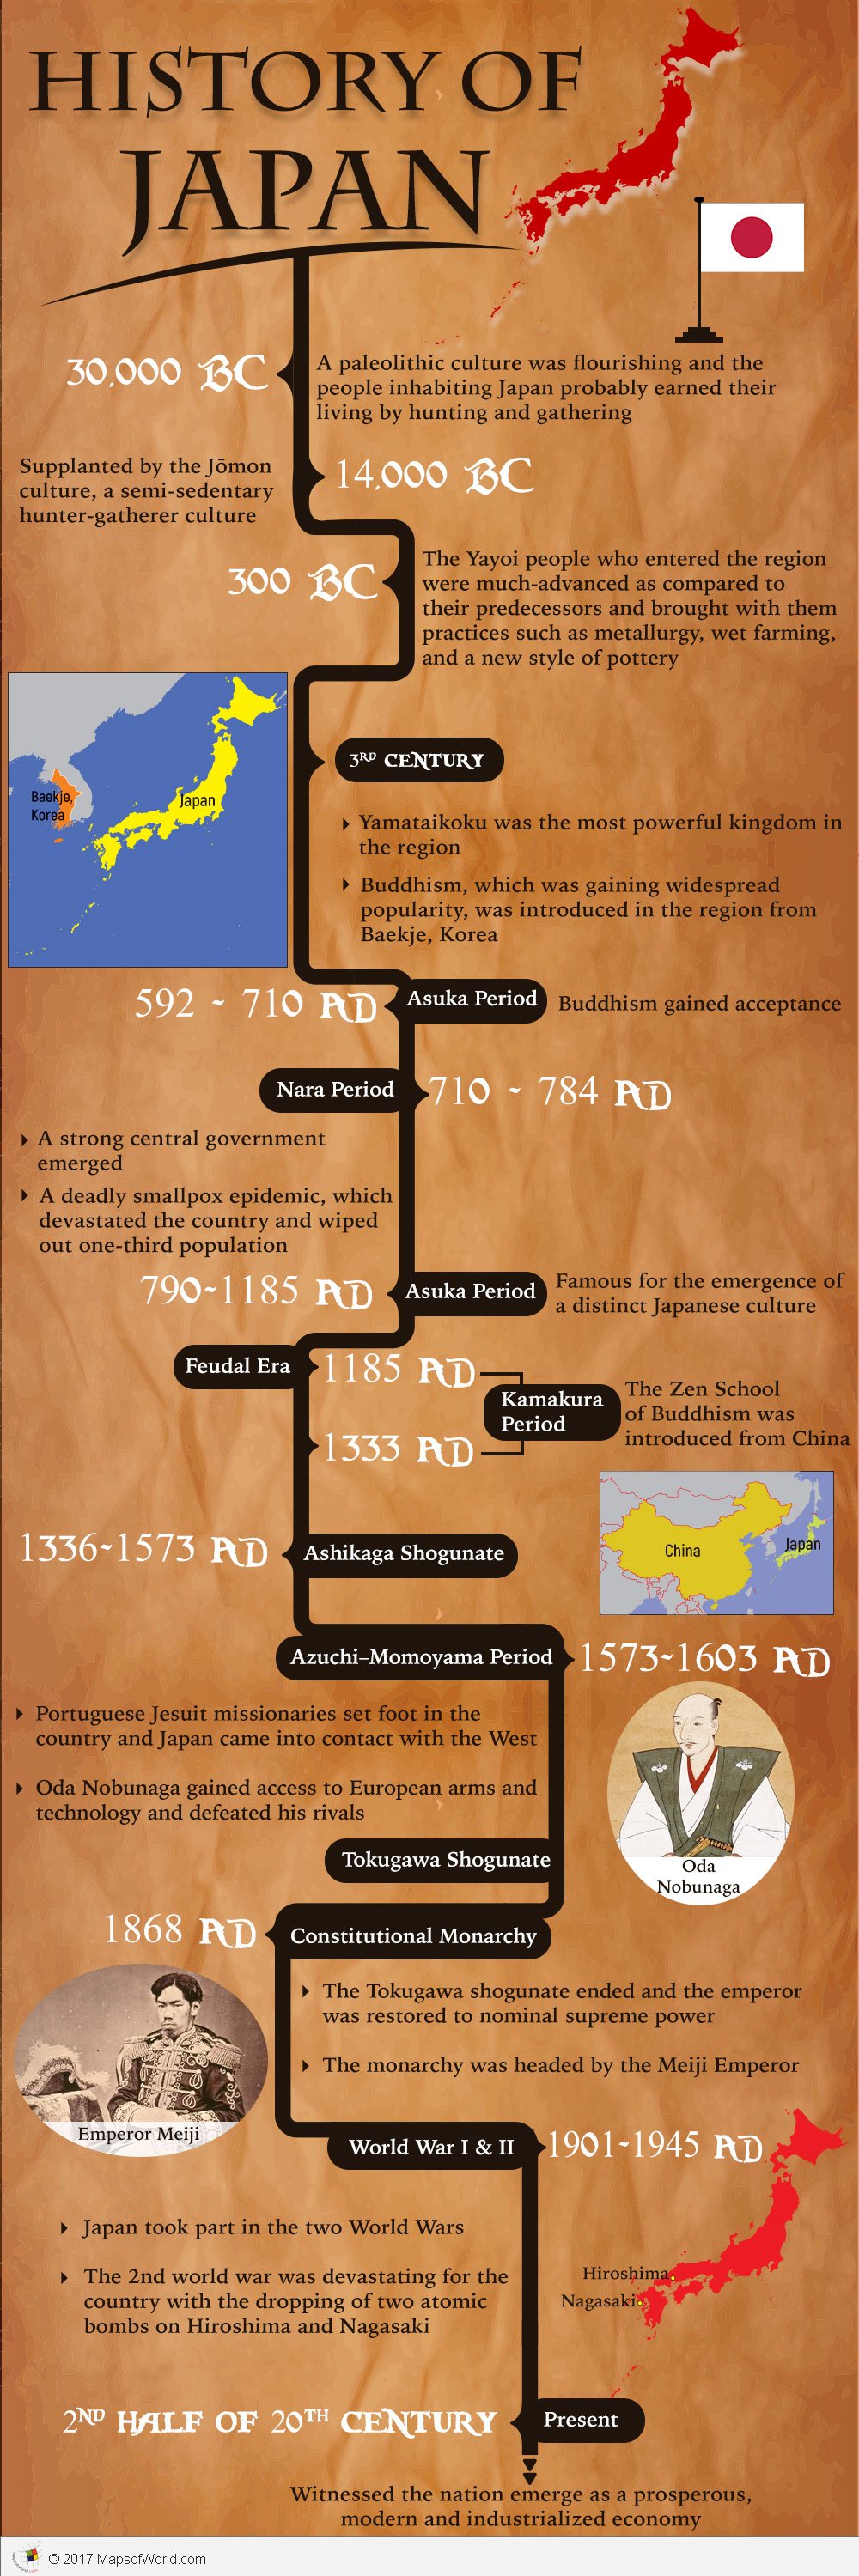 Infographic - History of Japan